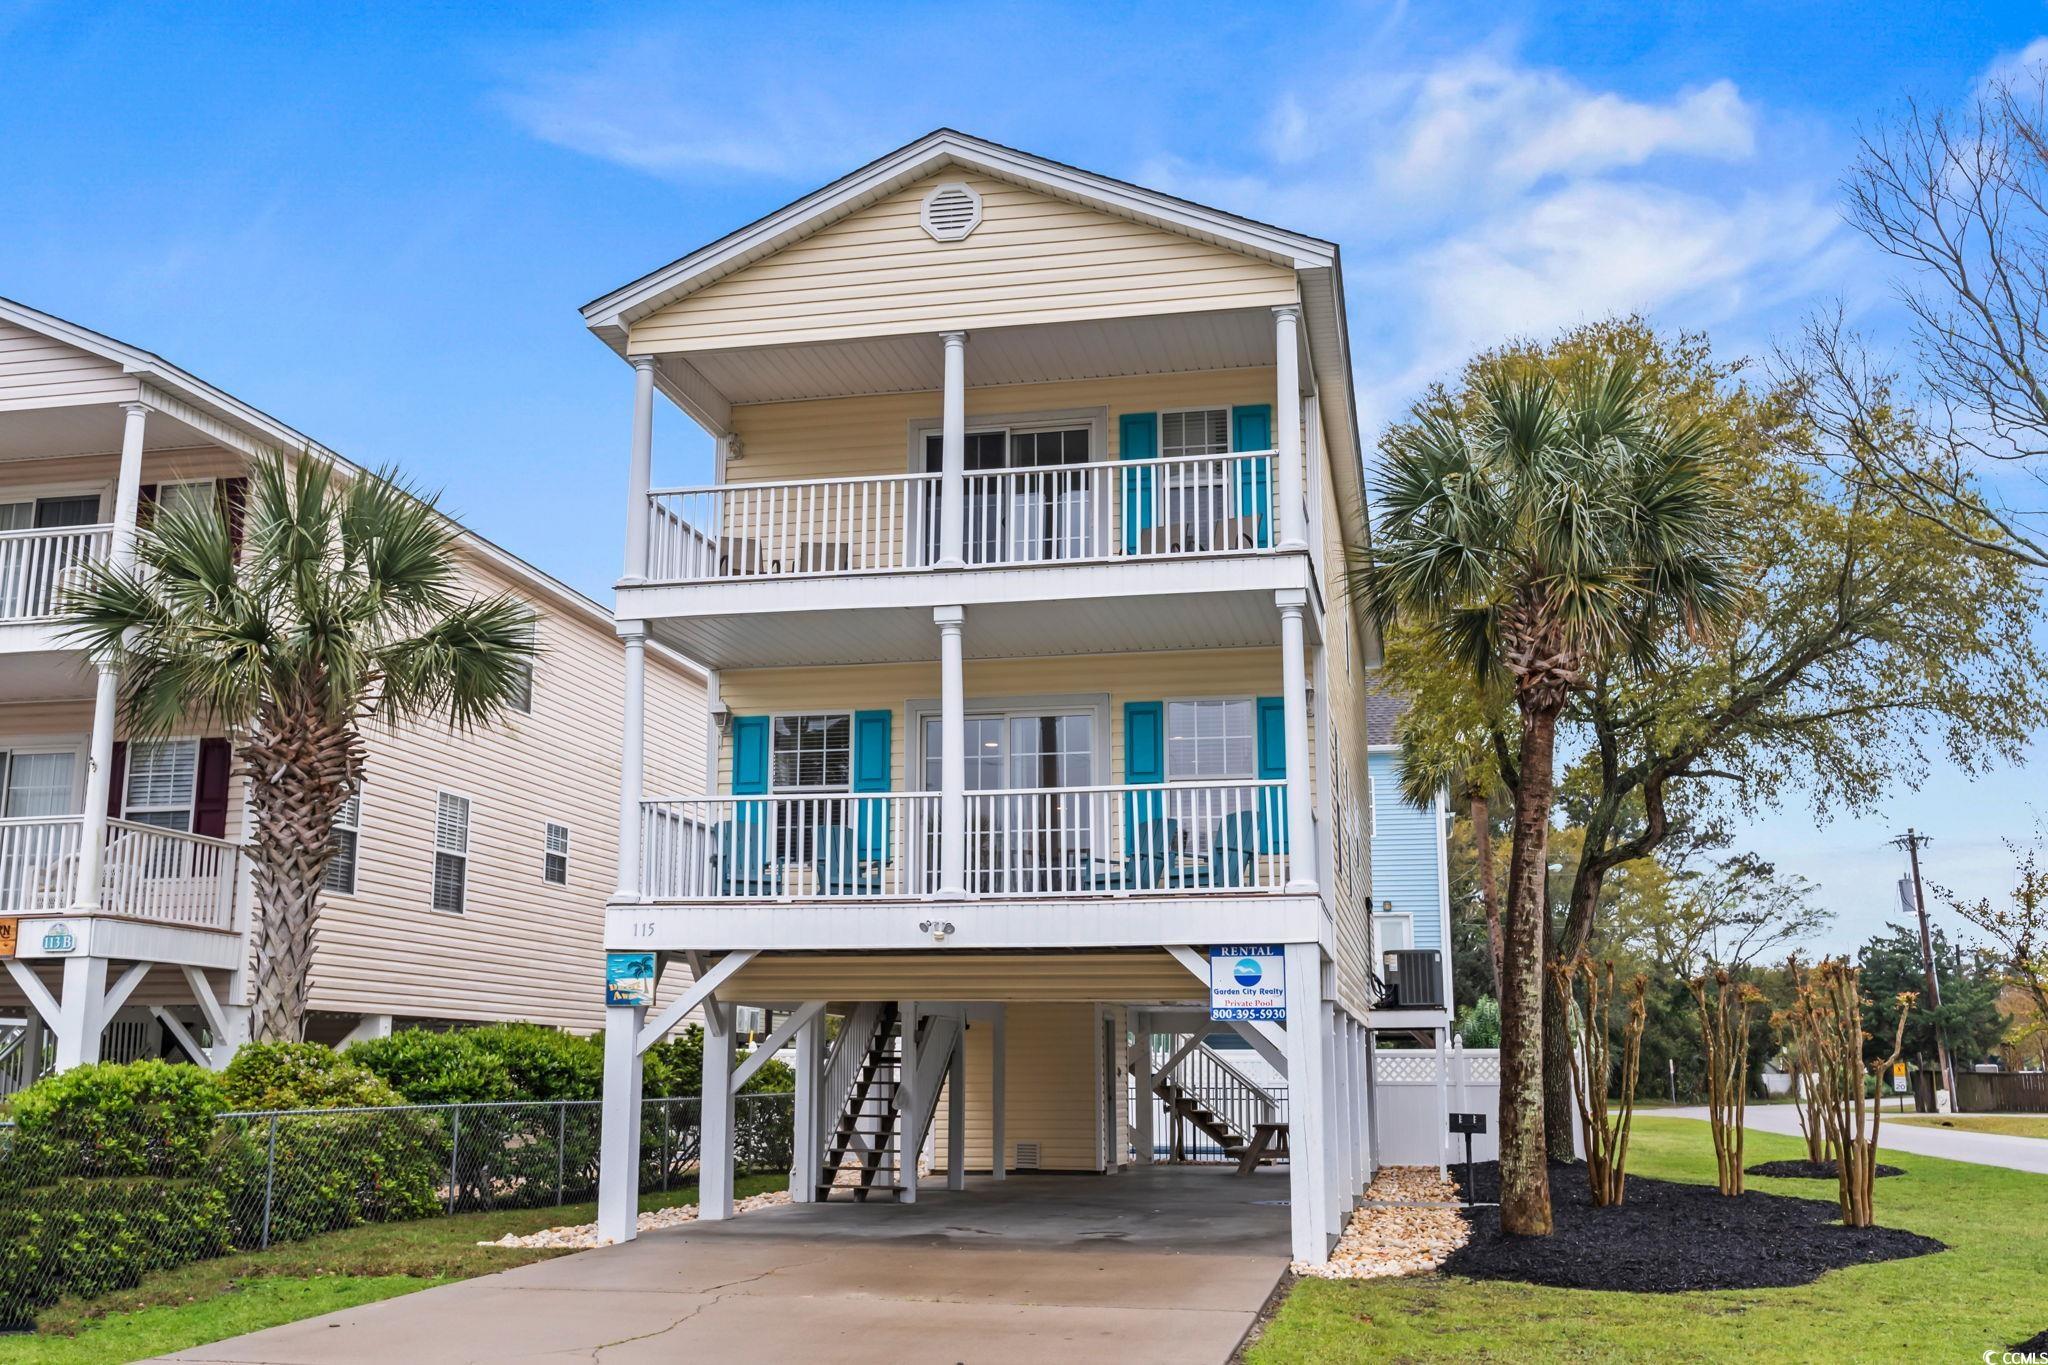 "drift away" is located in surfside beach within one block of the beach. you will notice in the pictures, that 5th avenue south has direct beach access at the end of the street. the first floor of the home features the living room, kitchen, laundry, dining area, bedroom and full bath, and a porch on the front with ocean views. upstairs has three more bedrooms and three full baths as well as a private balcony off of the master suite. from this balcony you can catch a glimpse of the sand and waves! improvements have been done such as new granite countertops in the kitchen, painted cabinetry, whole house painted, all furniture is new except master bedroom. roof 2017. hvac 2019.  the backyard features a private pool with a fenced in yard. pool was refinished in march. new pool equipment in 2023. this corner lot is just a few steps from the beach yet it is on a quiet street that does not have much through traffic.